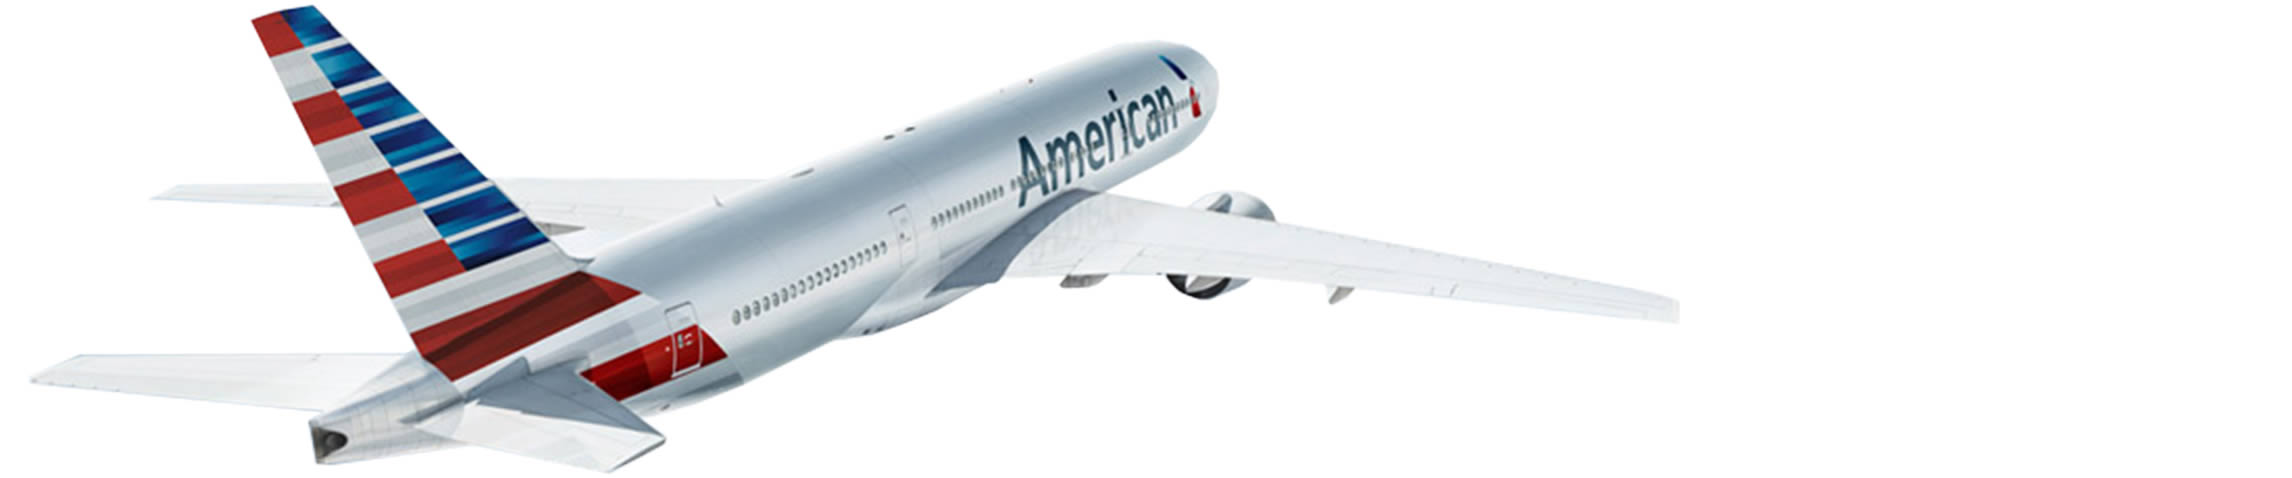 PNG) · American Airlines Gro